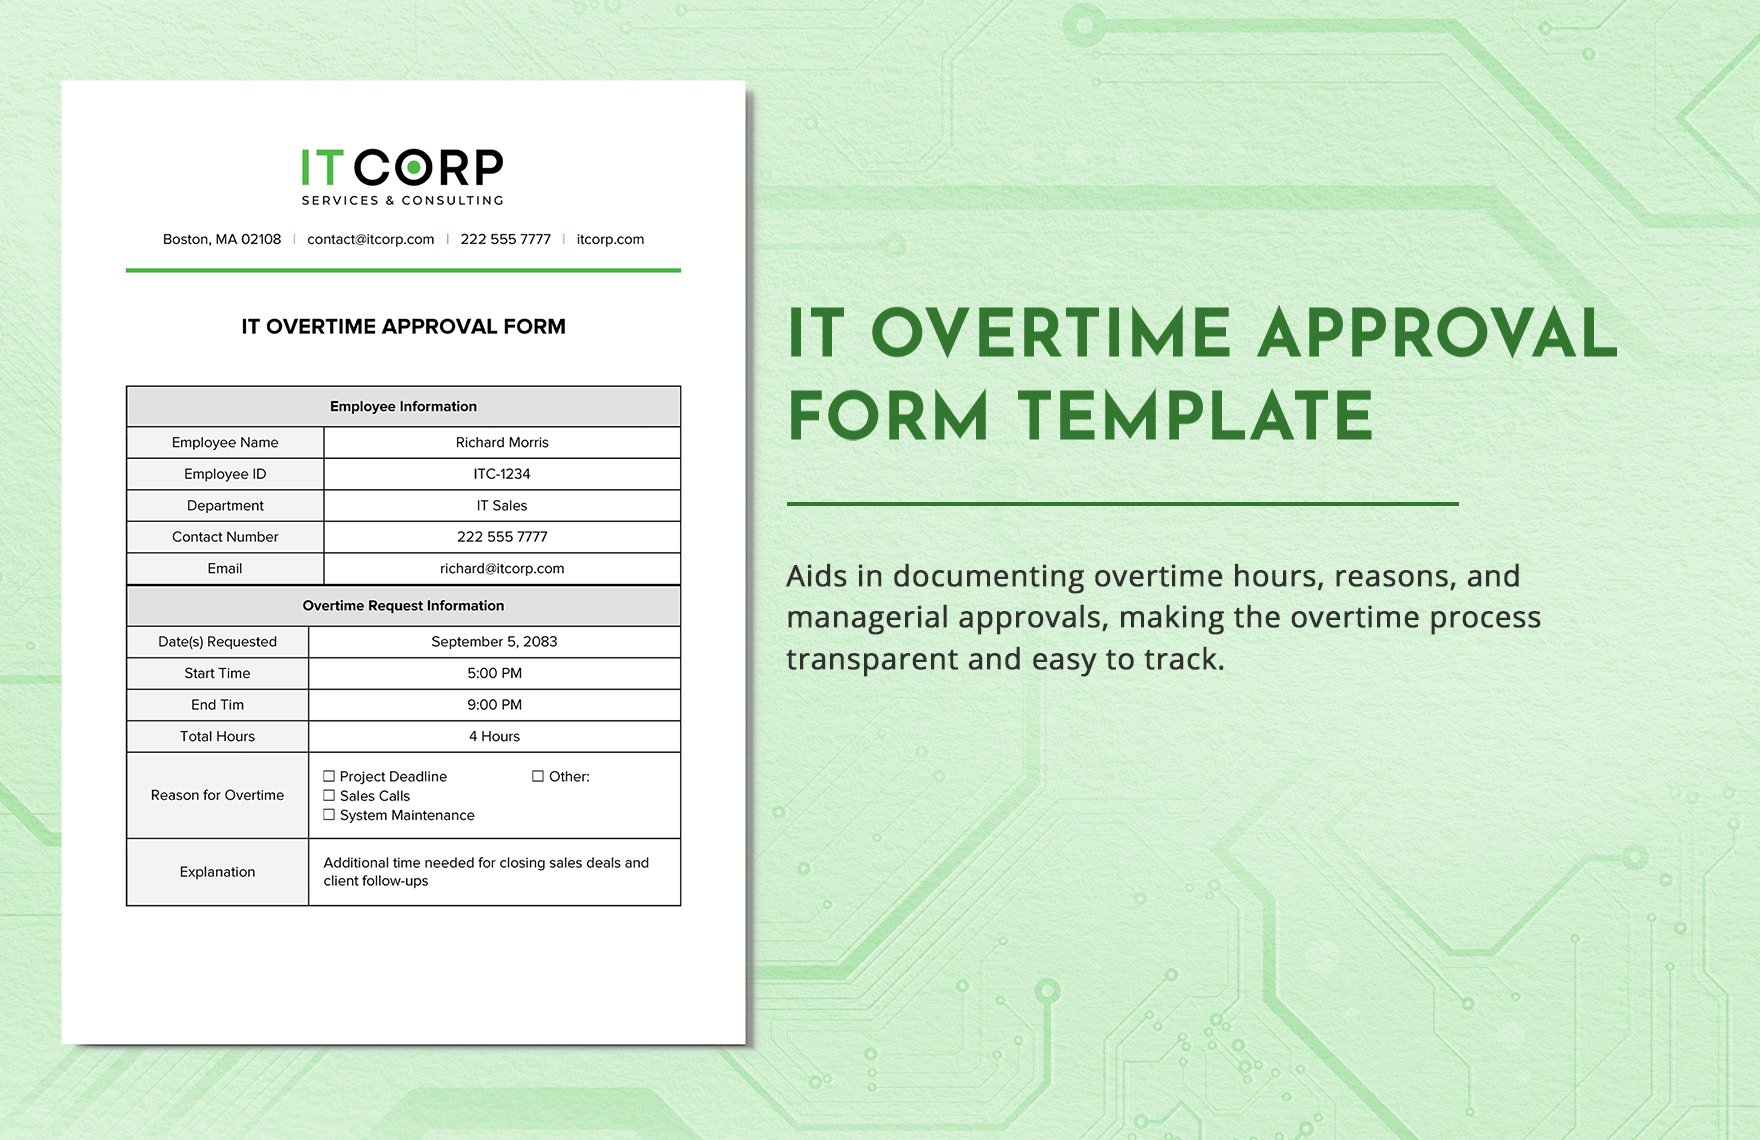 IT Overtime Approval Form Template